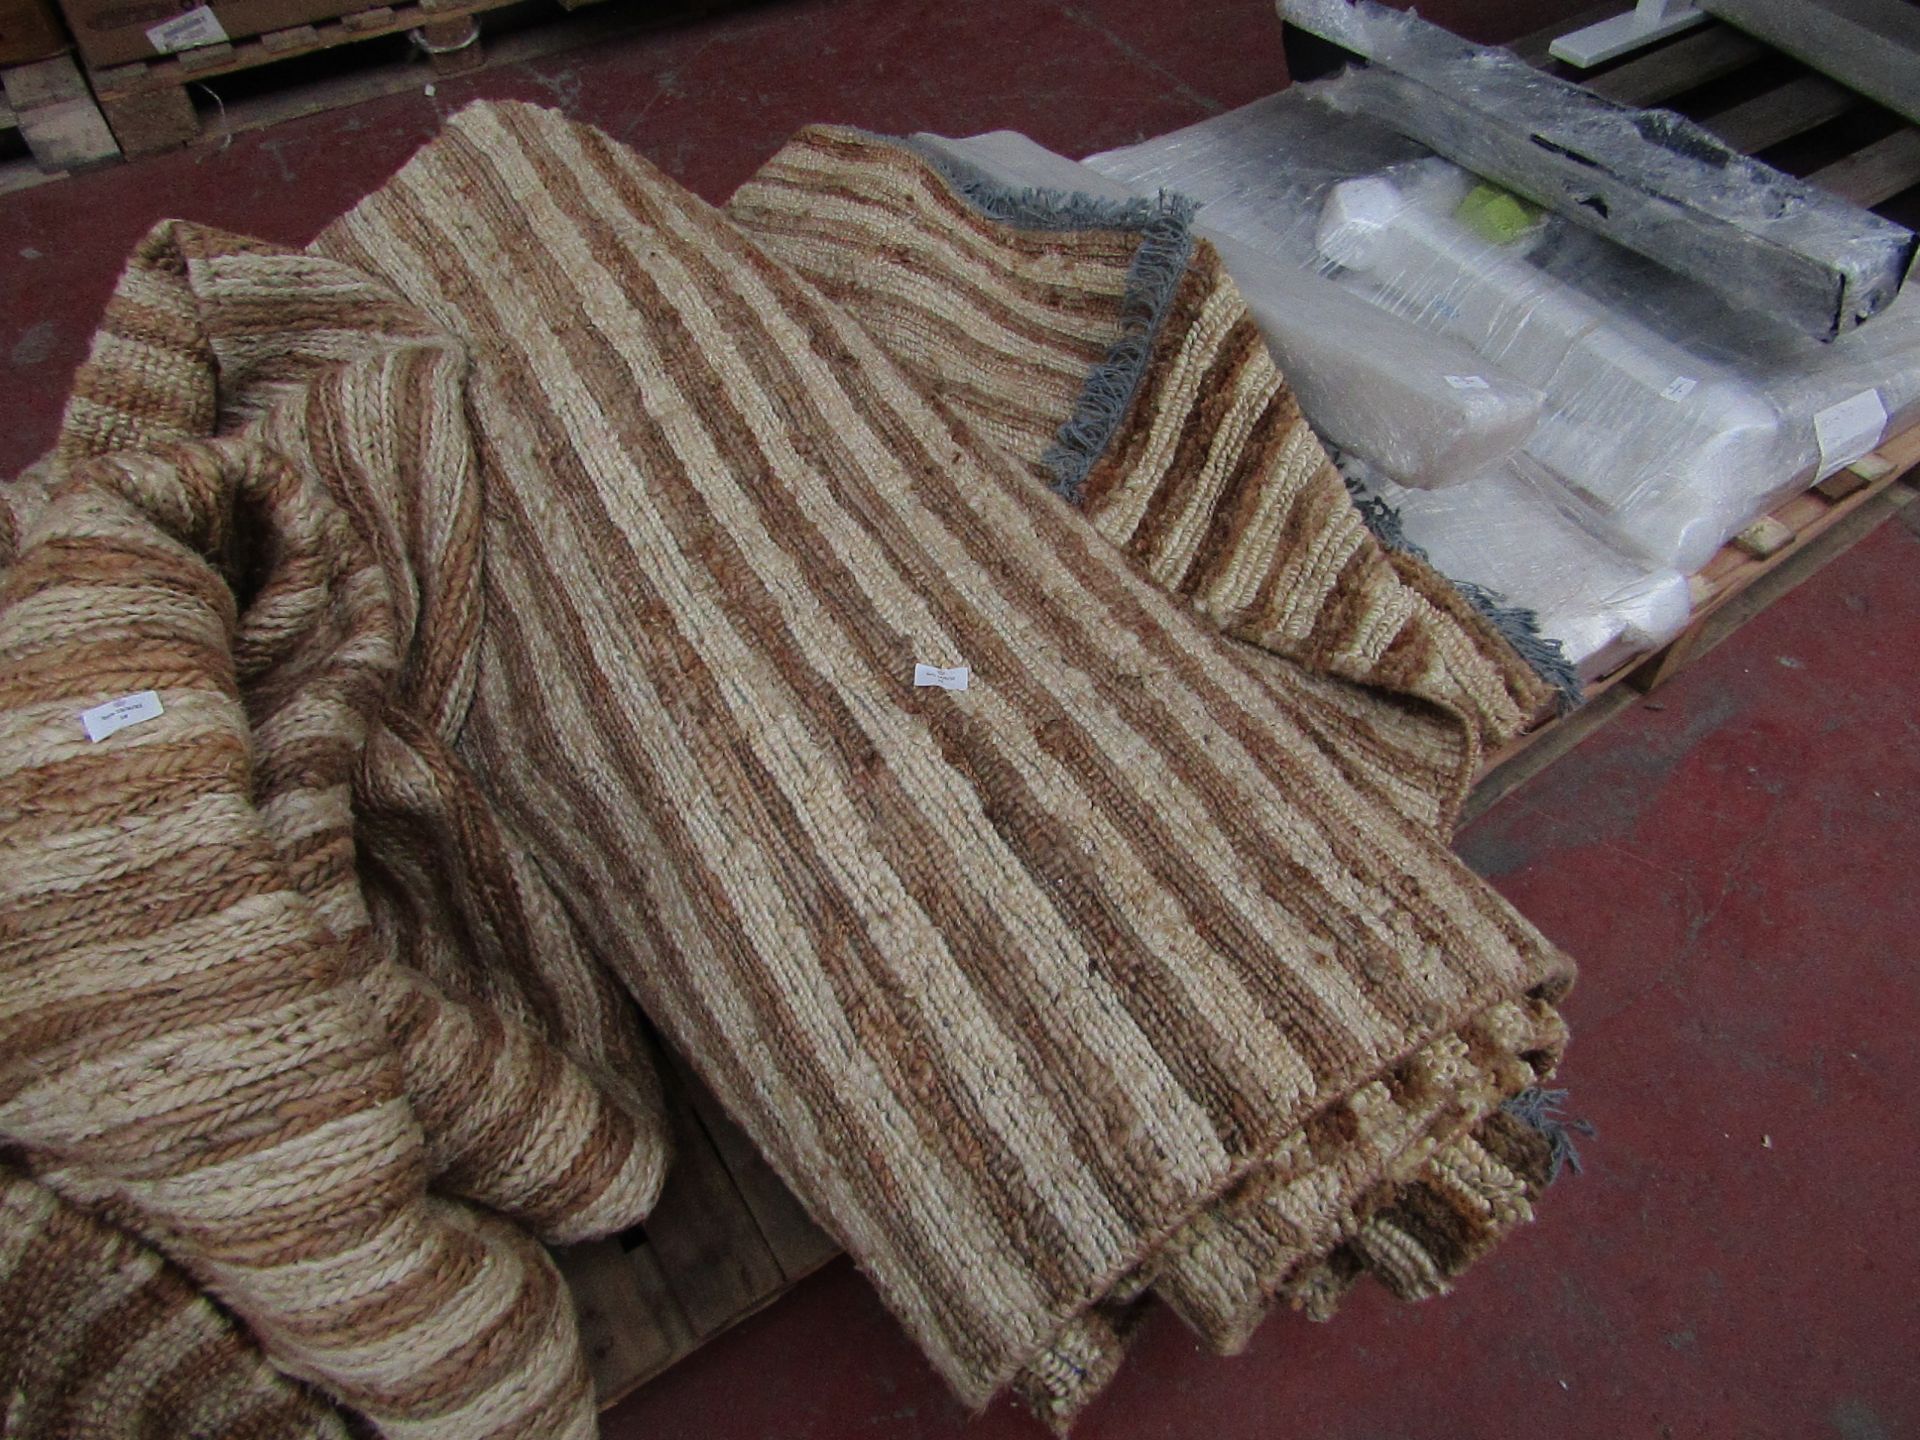 | 1X | OKA WOVEN LARGE RUG | SEE PIC FOR DESIGN | LOOKS IN GOOD CONDITION | RRP œ - |